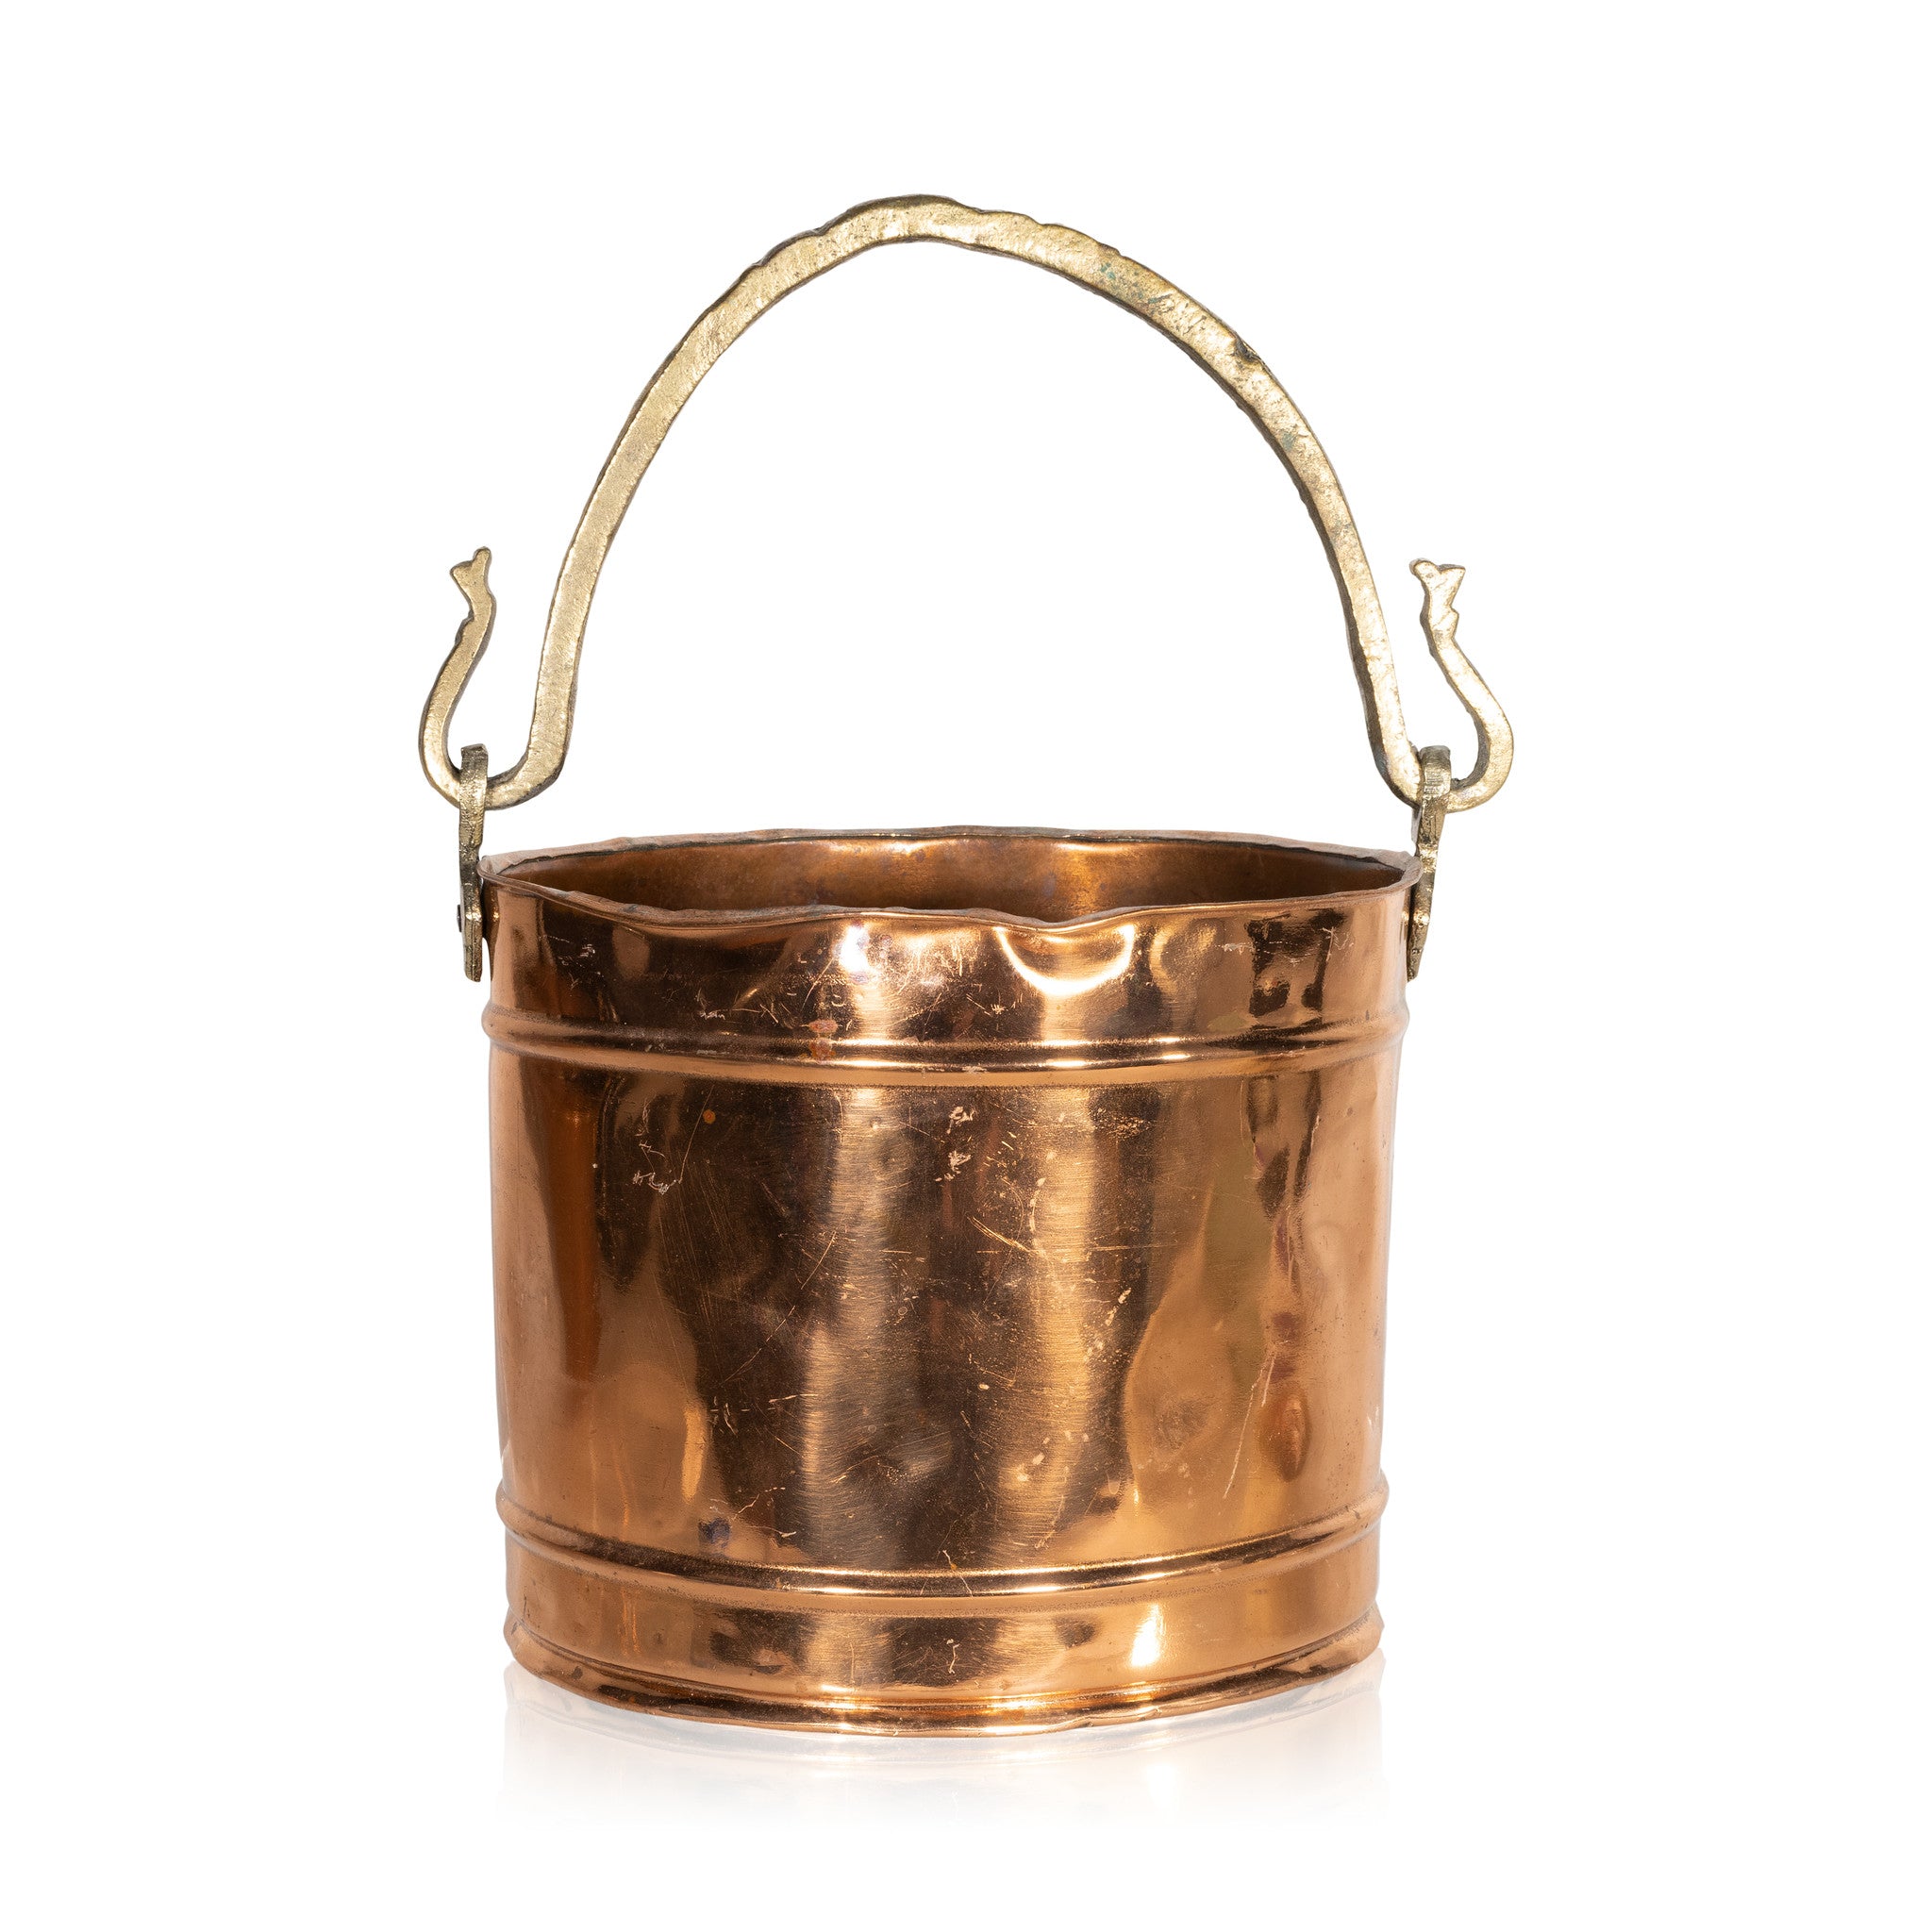 Copper Dovetail Hanging Kettle, Furnishings, Kitchen, Cookware